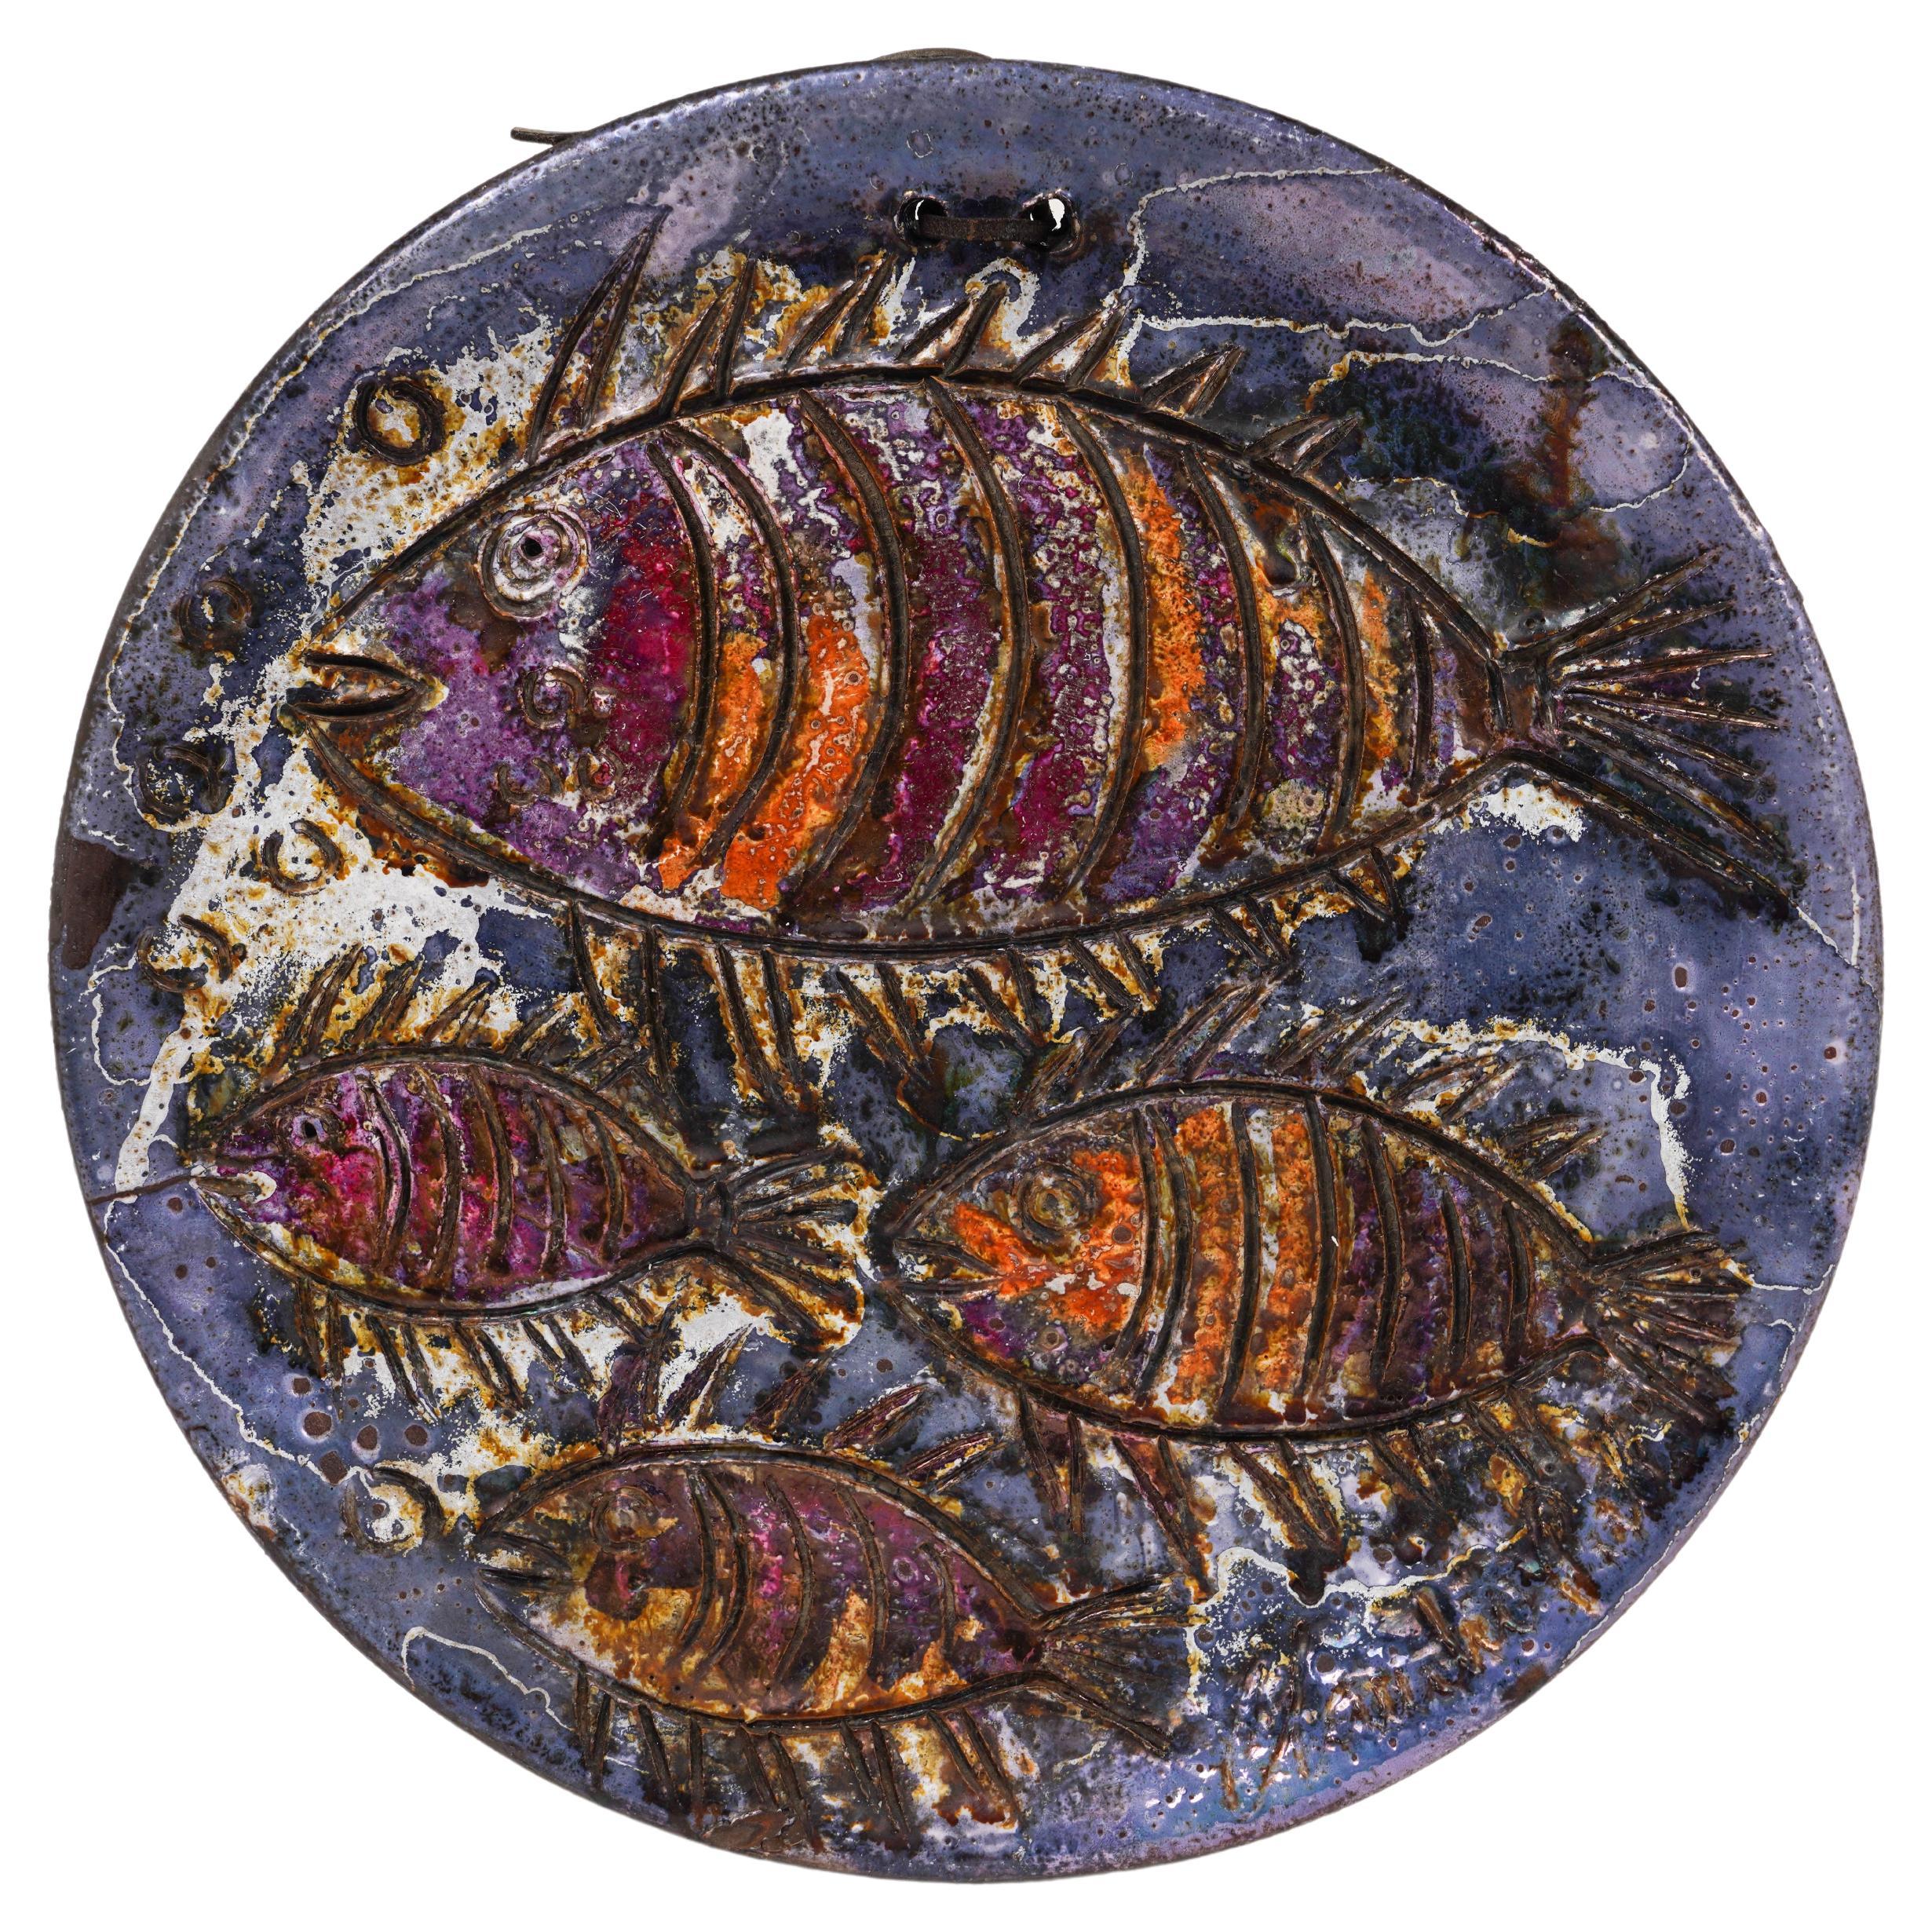 Decorative Round Wall Dish Plate in Ceramic by Claudio Pulli, Italy 1970s